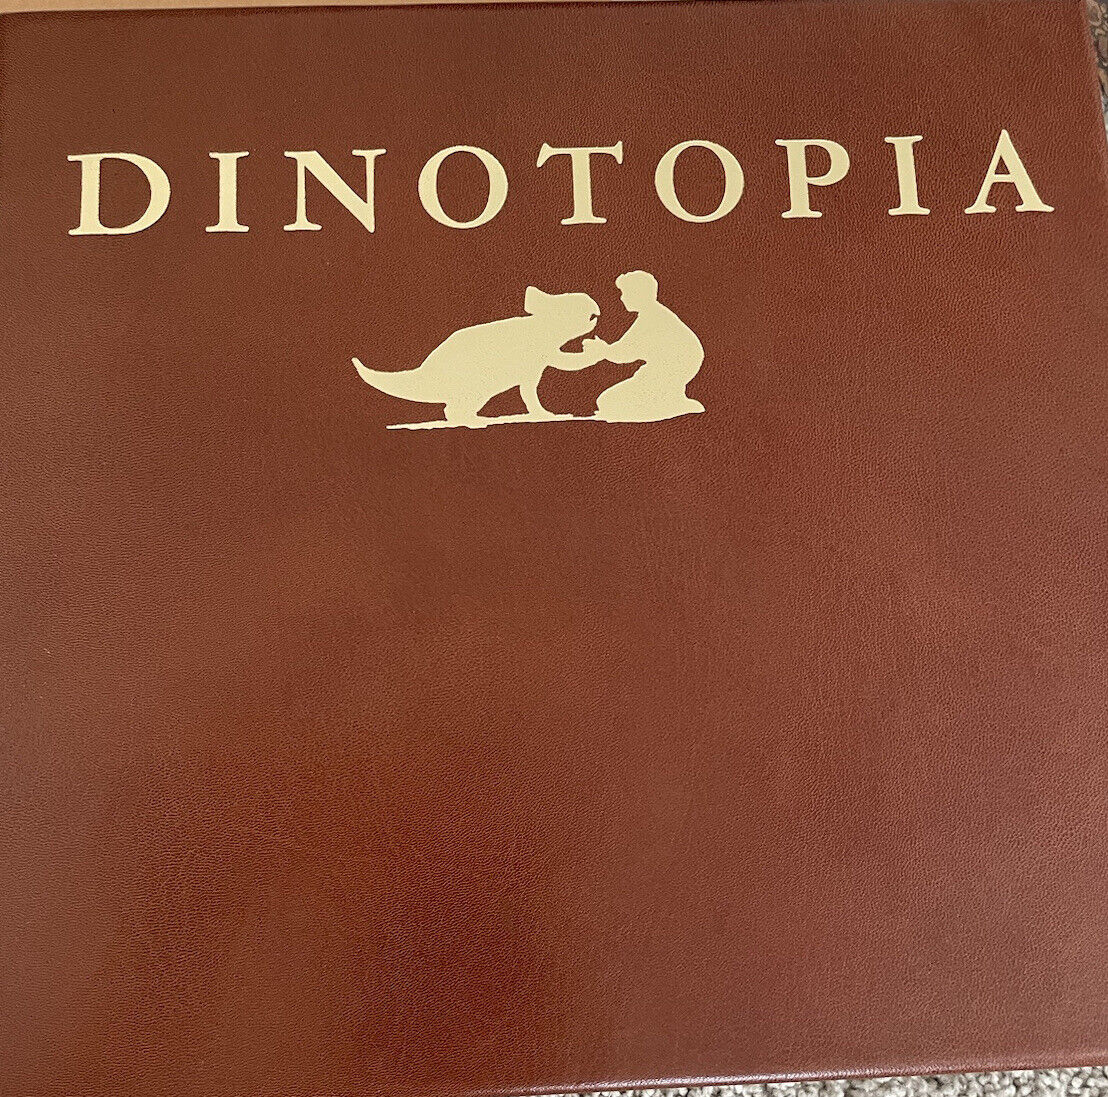 Dinotopia book: Leather bound & Signed